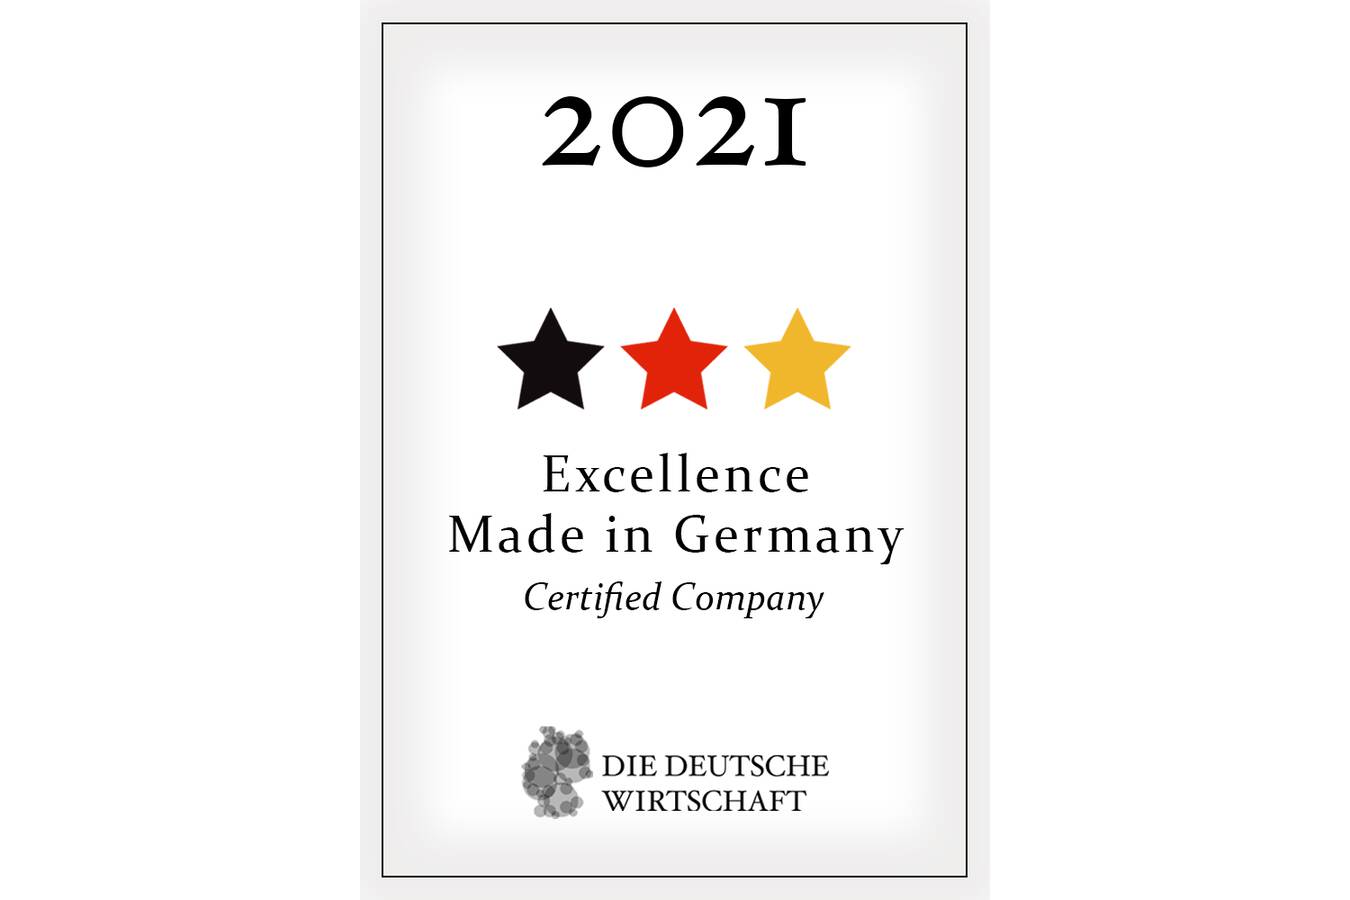 FRITSCH was awarded as a company of excellence DDW Die Deutsche Wirtschaft has identified FRITSCH as one of the 3,000 German companies in trend and growth markets.